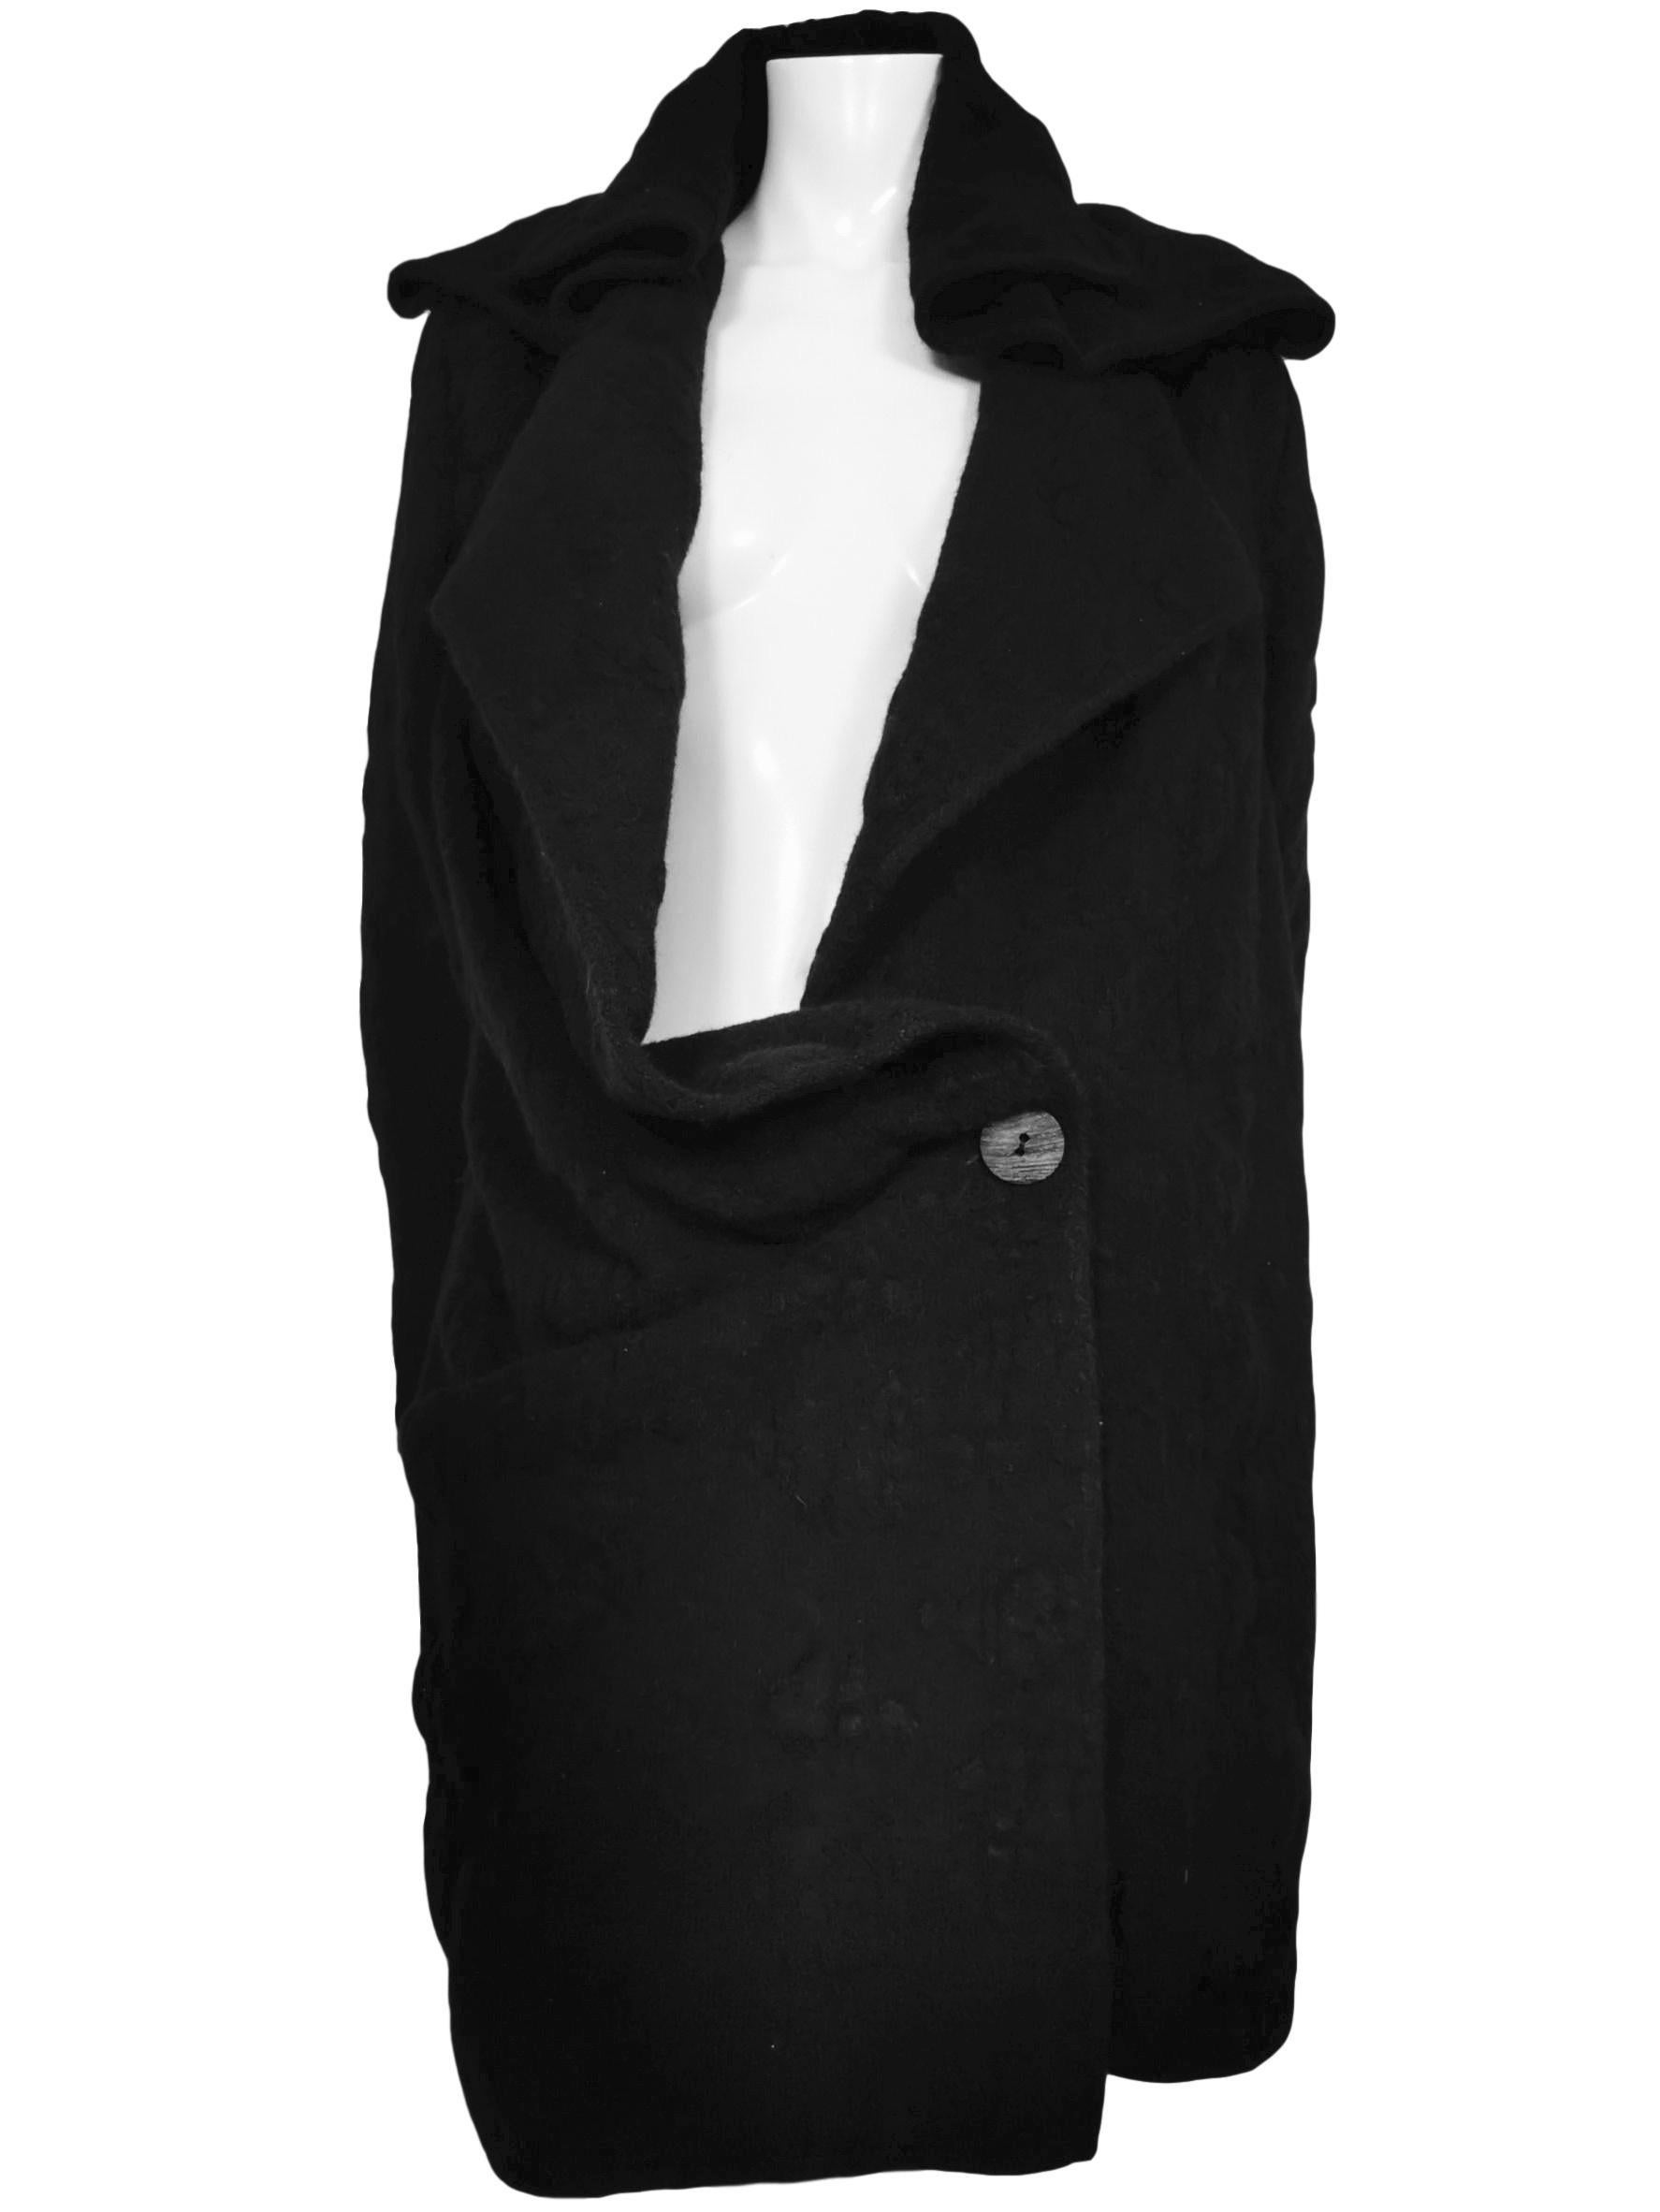 John Galliano Fall/Winter 2000 Oversize Slouchy Textured Wool and Mohair Coat For Sale 1